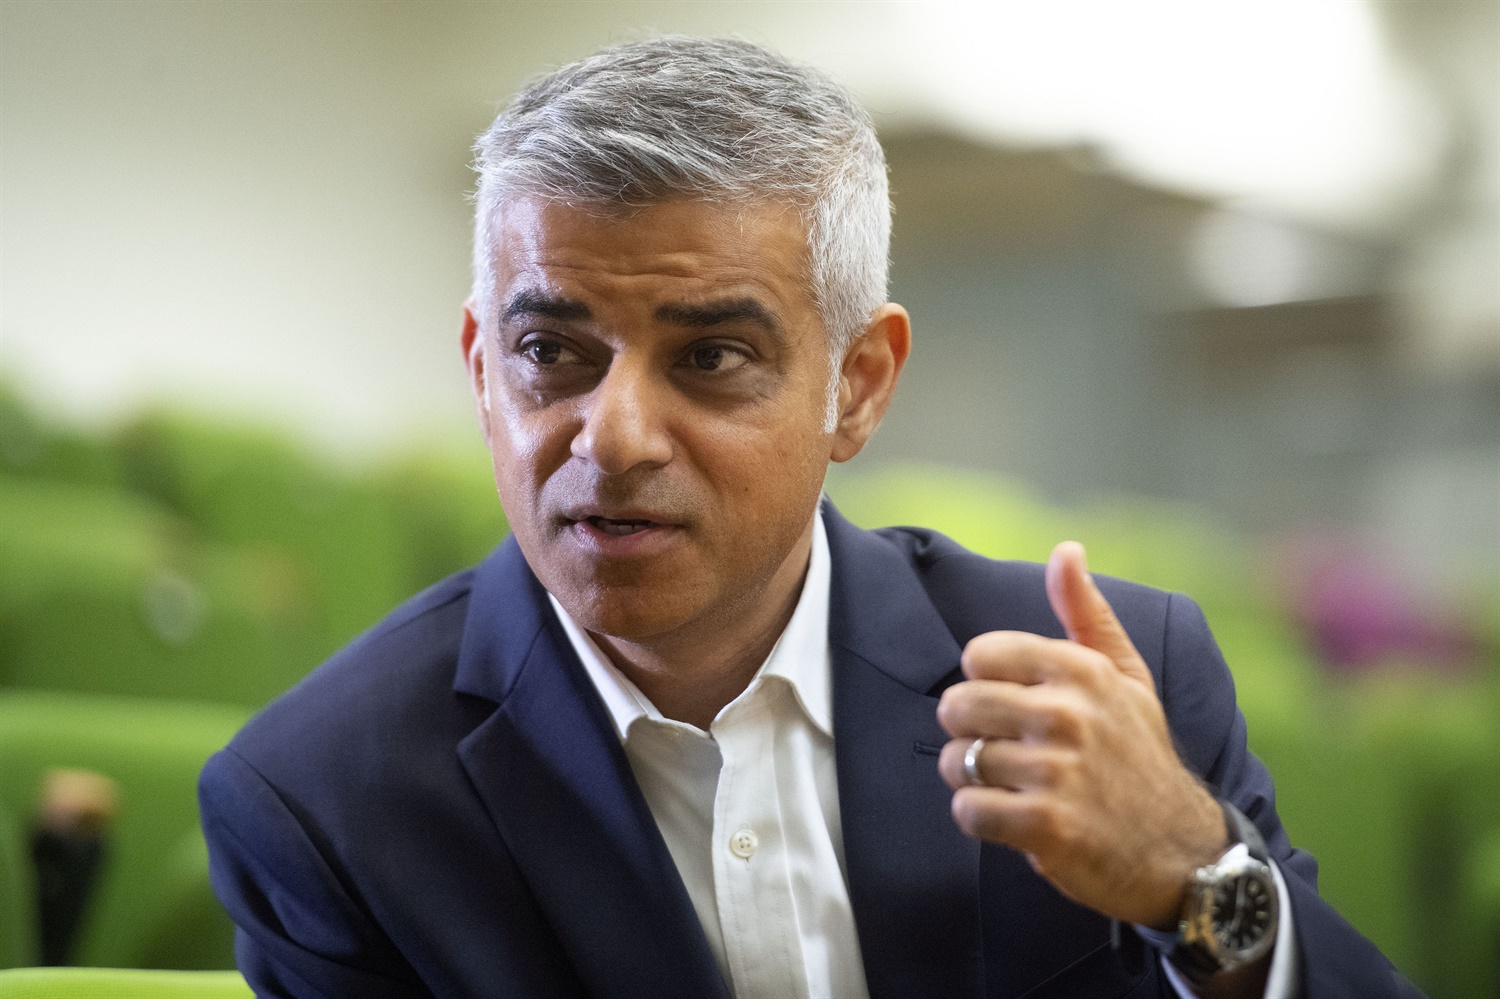 Transport minister blames Khan for TfL’s financial problems as it struggles to fund Crossrail